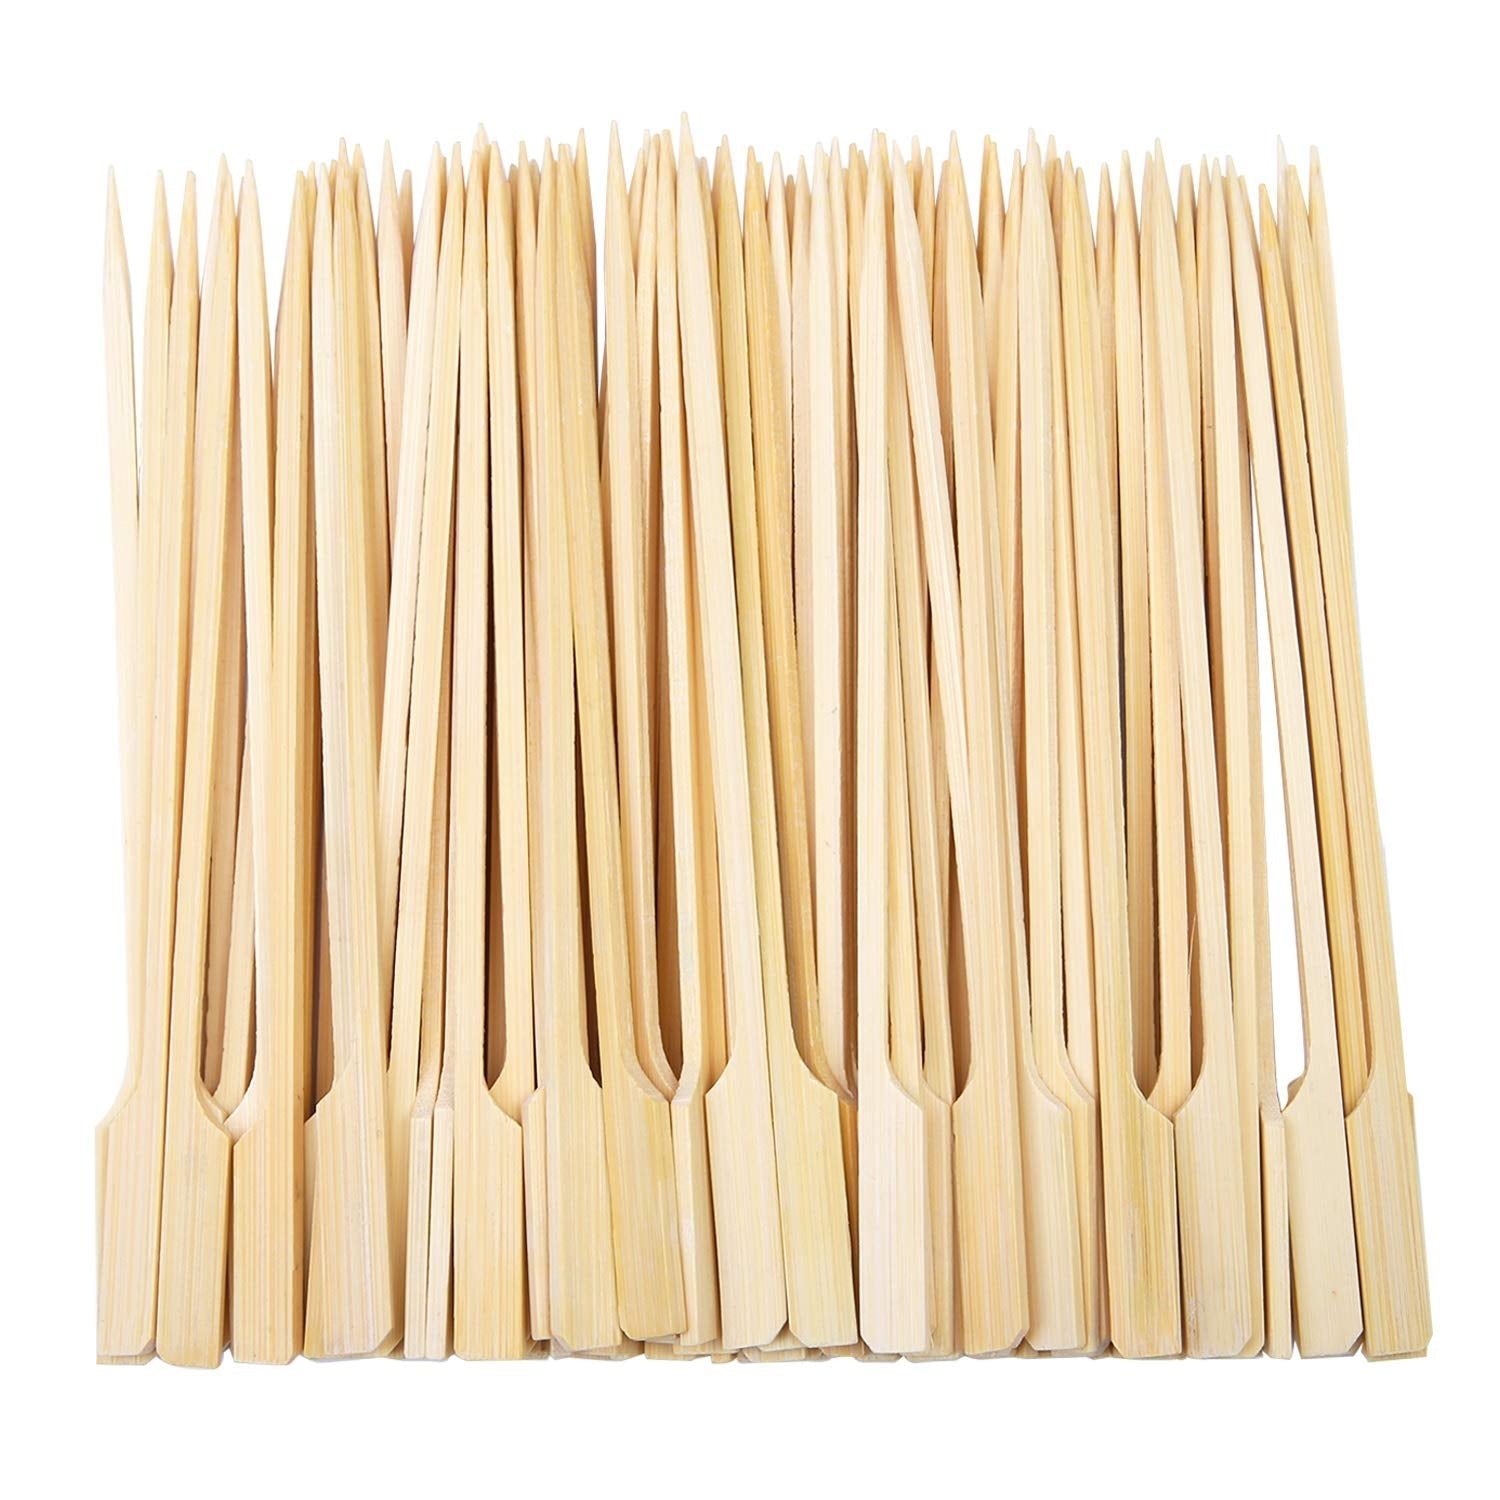 Belgravia Bamboo Paddle Skewers 15cm Pack 100's - NWT FM SOLUTIONS - YOUR CATERING WHOLESALER